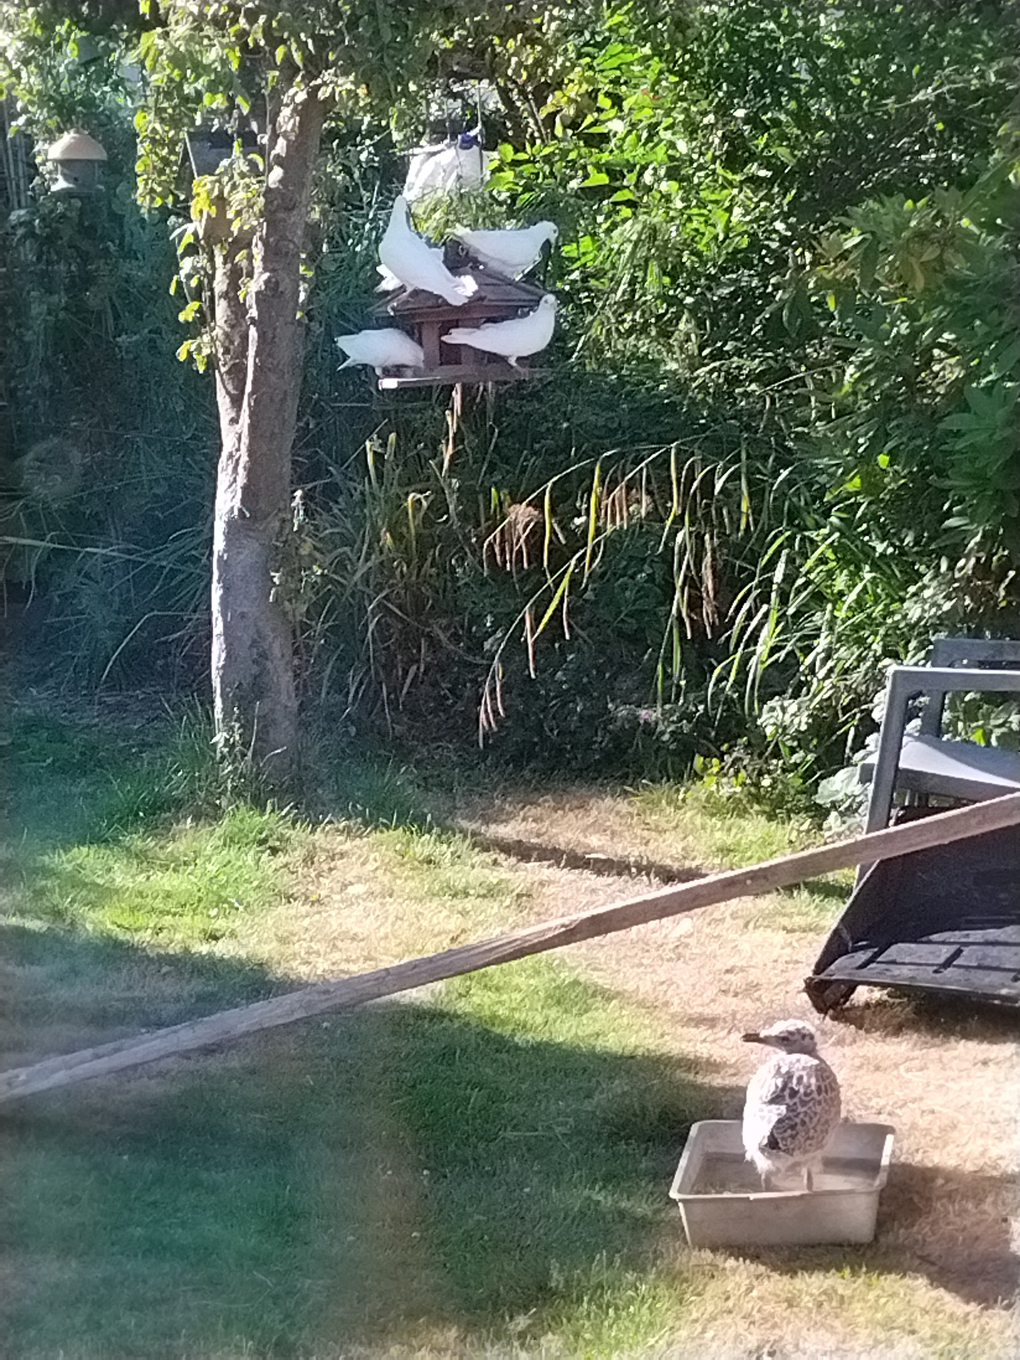 A baby Seagull is cooling down in a tray of water and 4 white doves are crowded on a birdhouse hanging in an apple tree